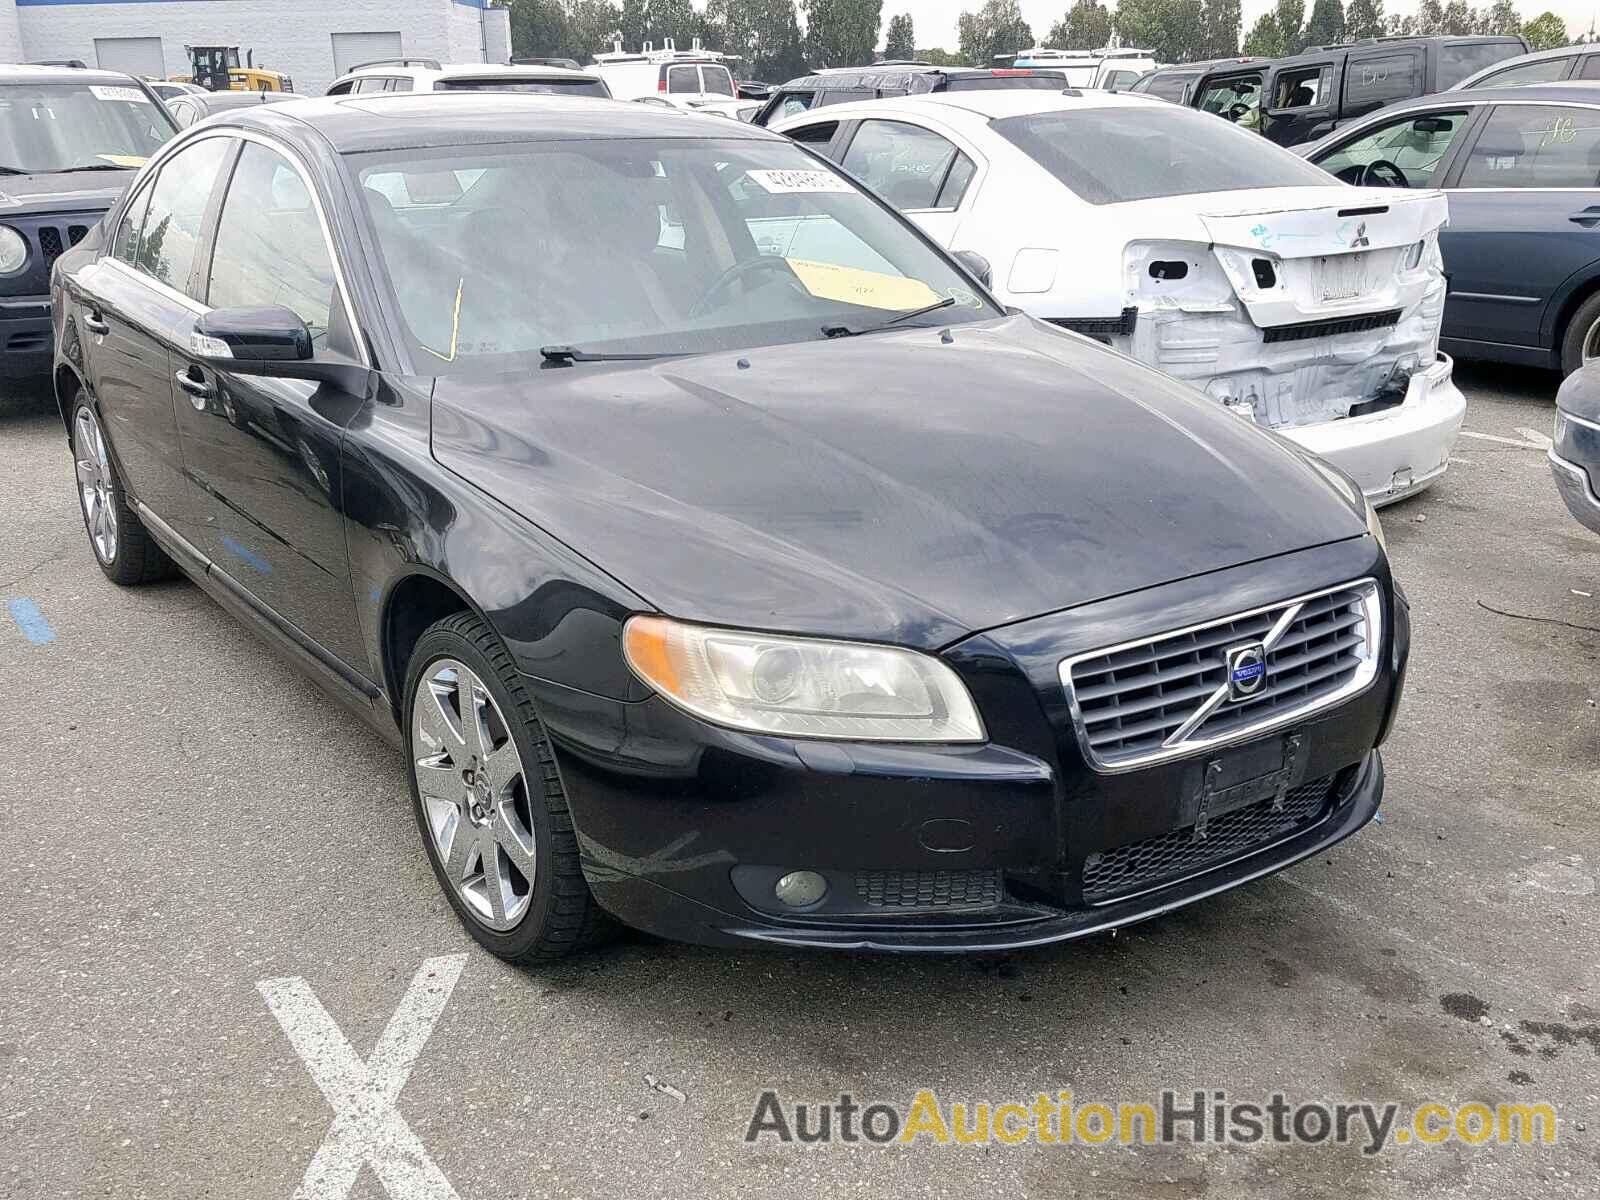 2007 VOLVO S80 3.2, YV1AS982071017615